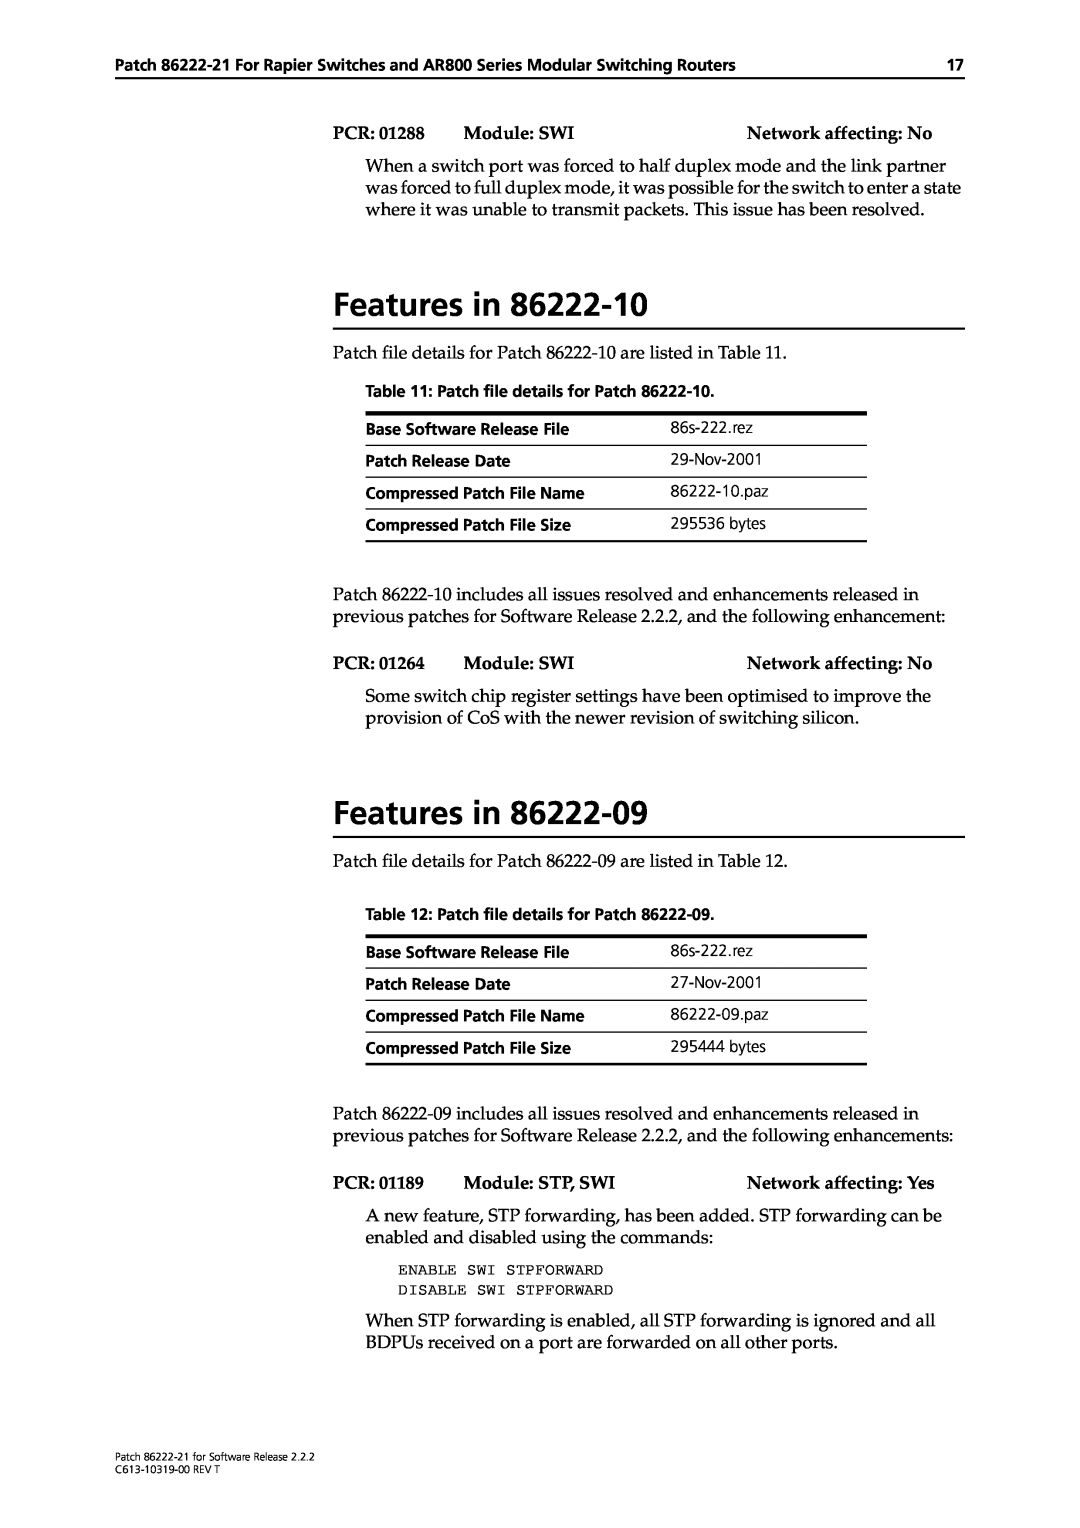 Allied Telesis 86222-21 manual Features in, Patch file details for Patch 86222-10 are listed in Table 